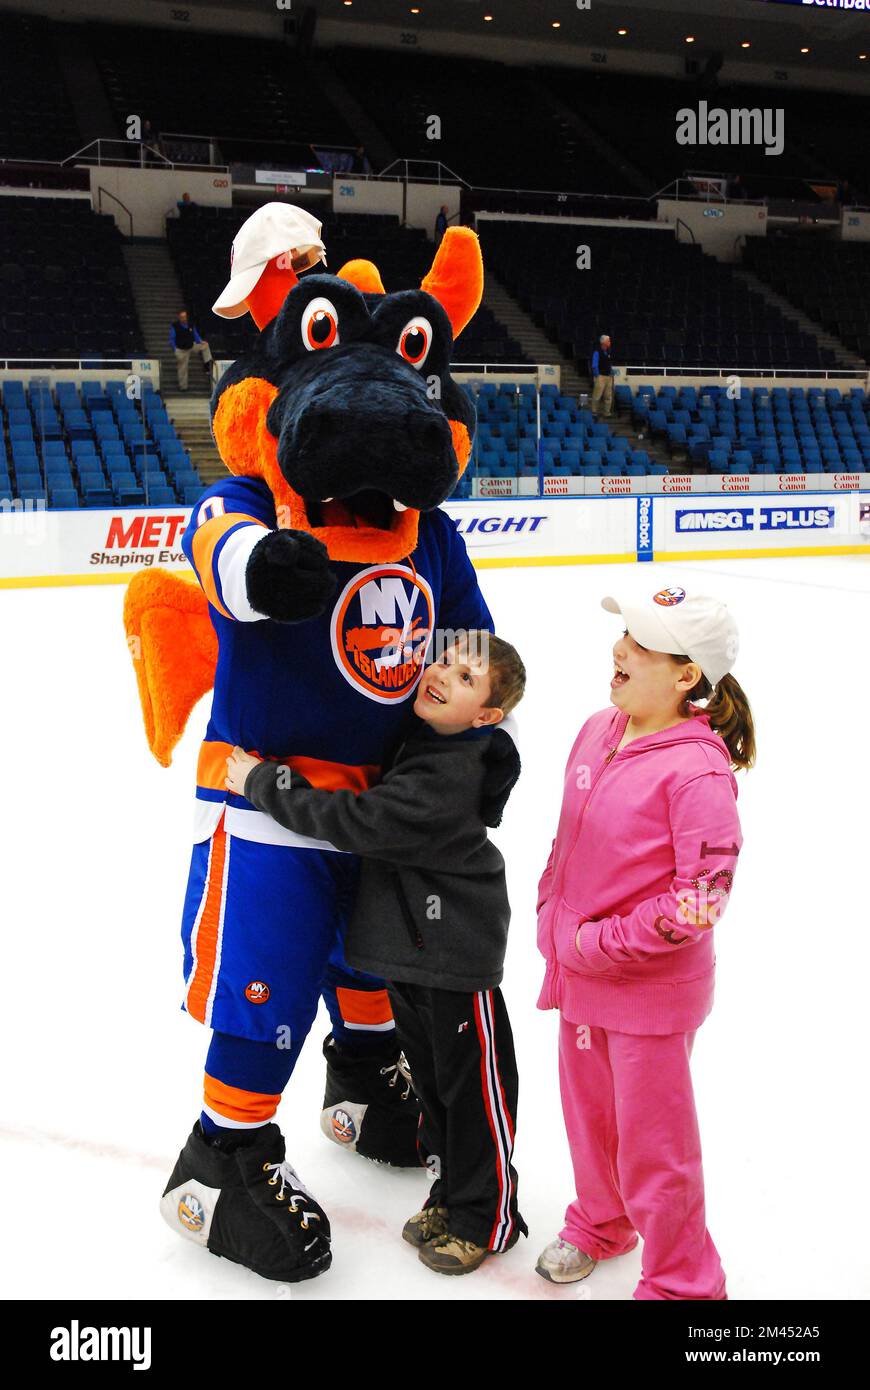 UNIONDALE, NY - JUNE 05: New York Islanders mascot Sparky the Dragon prior  to the Stanley Cup